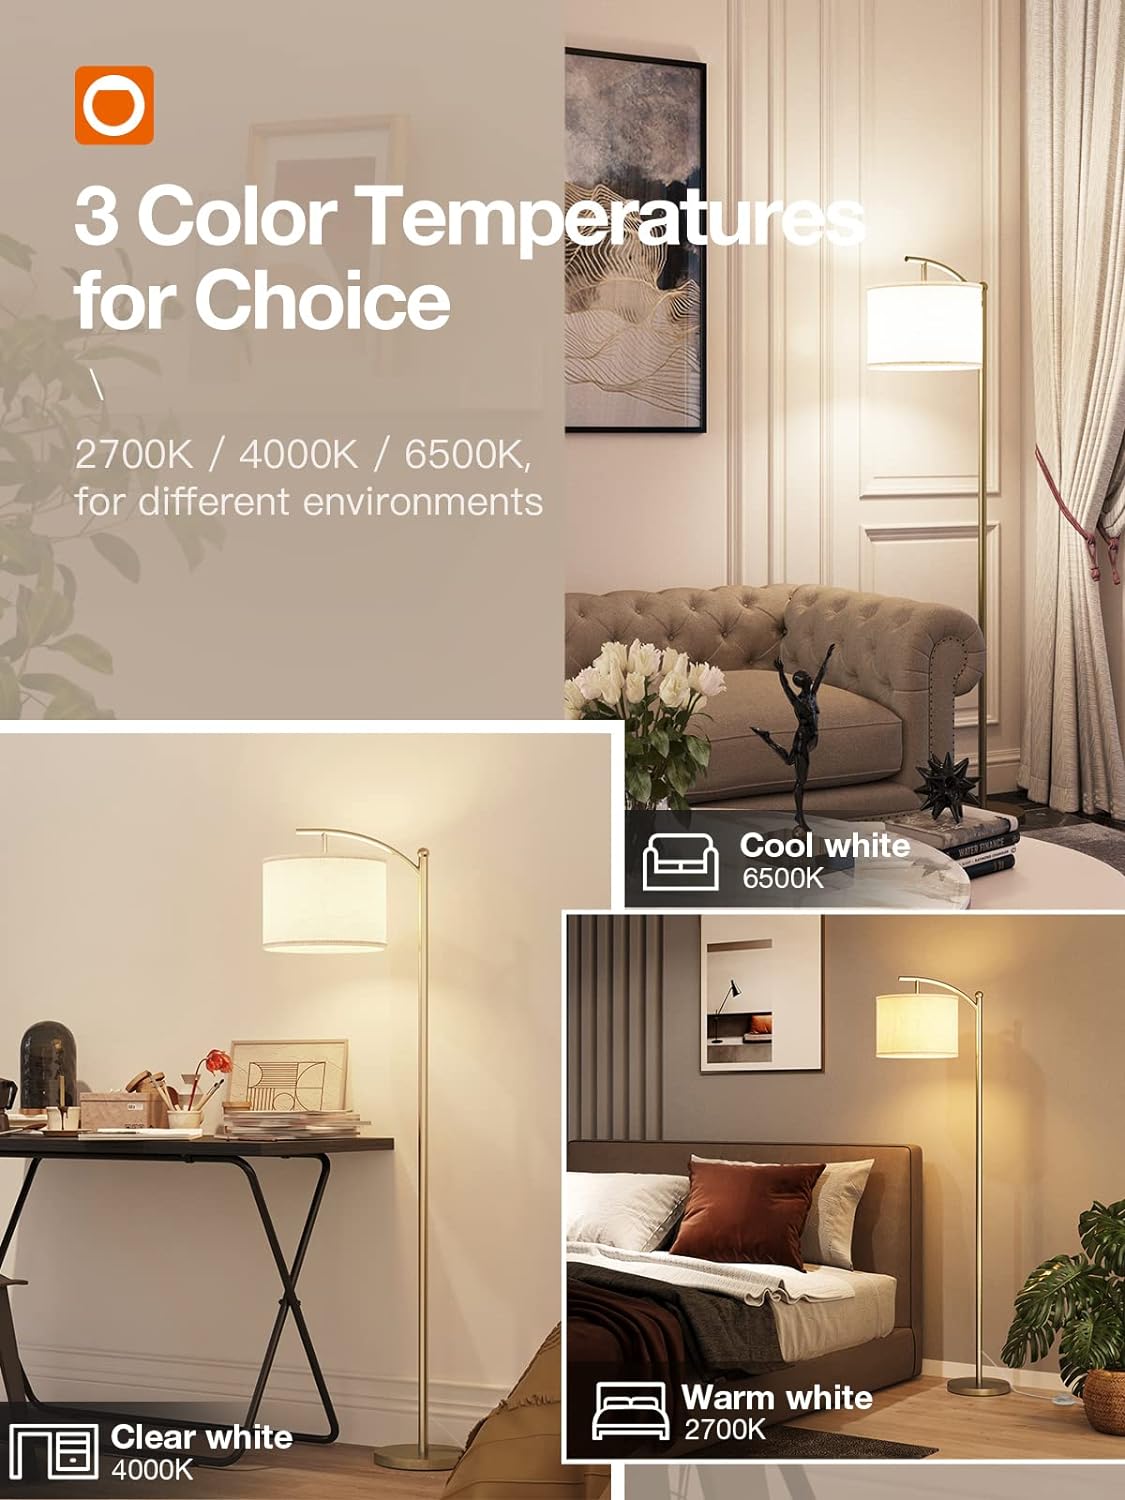 addlon Floor Lamp for Living Room with 3 Color Temperatures, Standing lamp with Linen lampshade for Bedroom, Office, Lamps with 9W LED Bulb Included - Brass Gold with Beige Shade